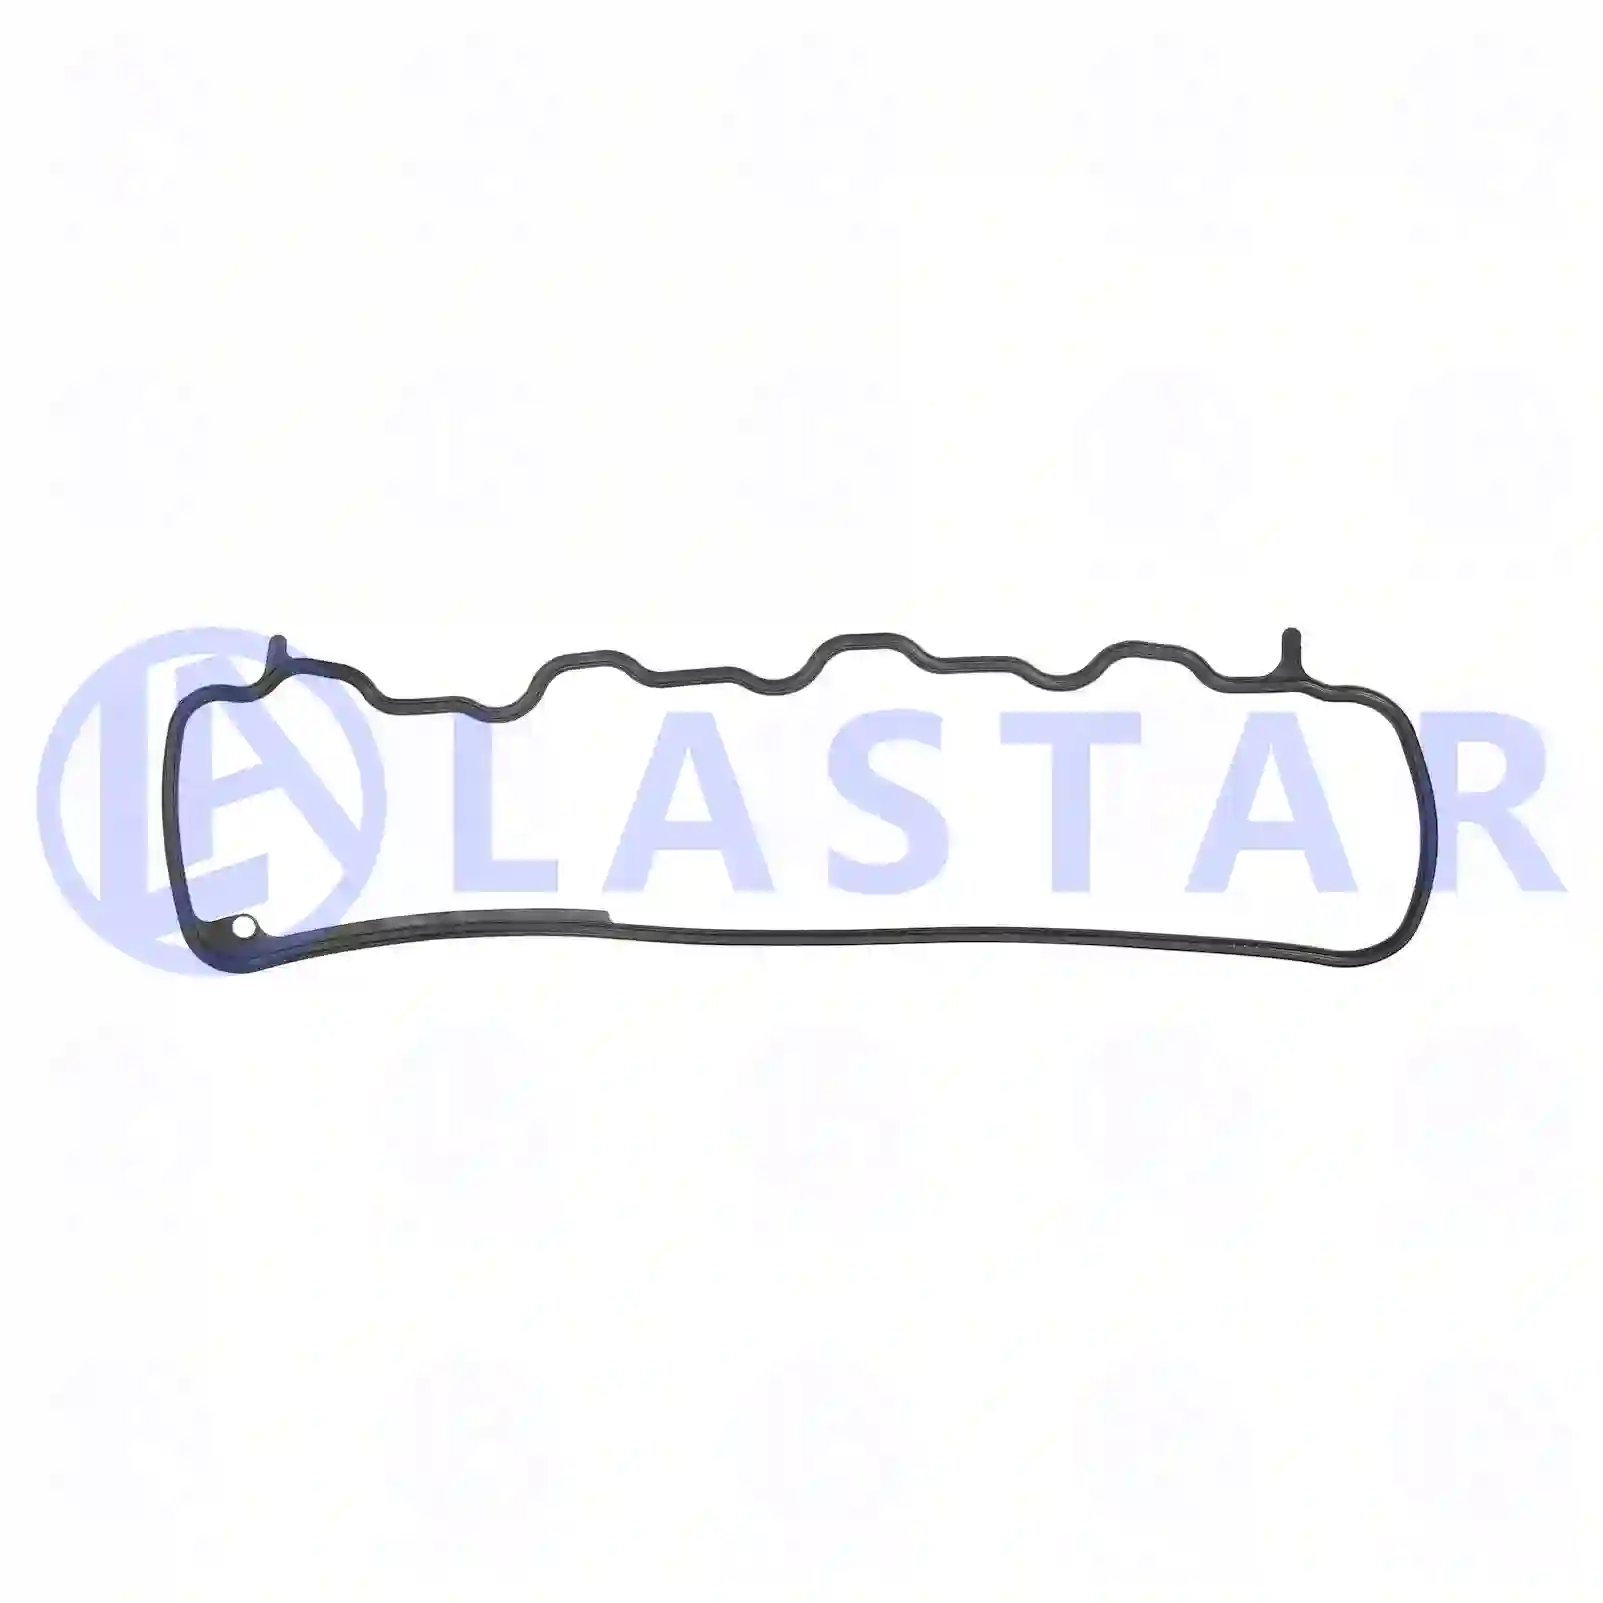 Gasket, cylinder head cover, 77701439, 9040160521, 90401 ||  77701439 Lastar Spare Part | Truck Spare Parts, Auotomotive Spare Parts Gasket, cylinder head cover, 77701439, 9040160521, 90401 ||  77701439 Lastar Spare Part | Truck Spare Parts, Auotomotive Spare Parts